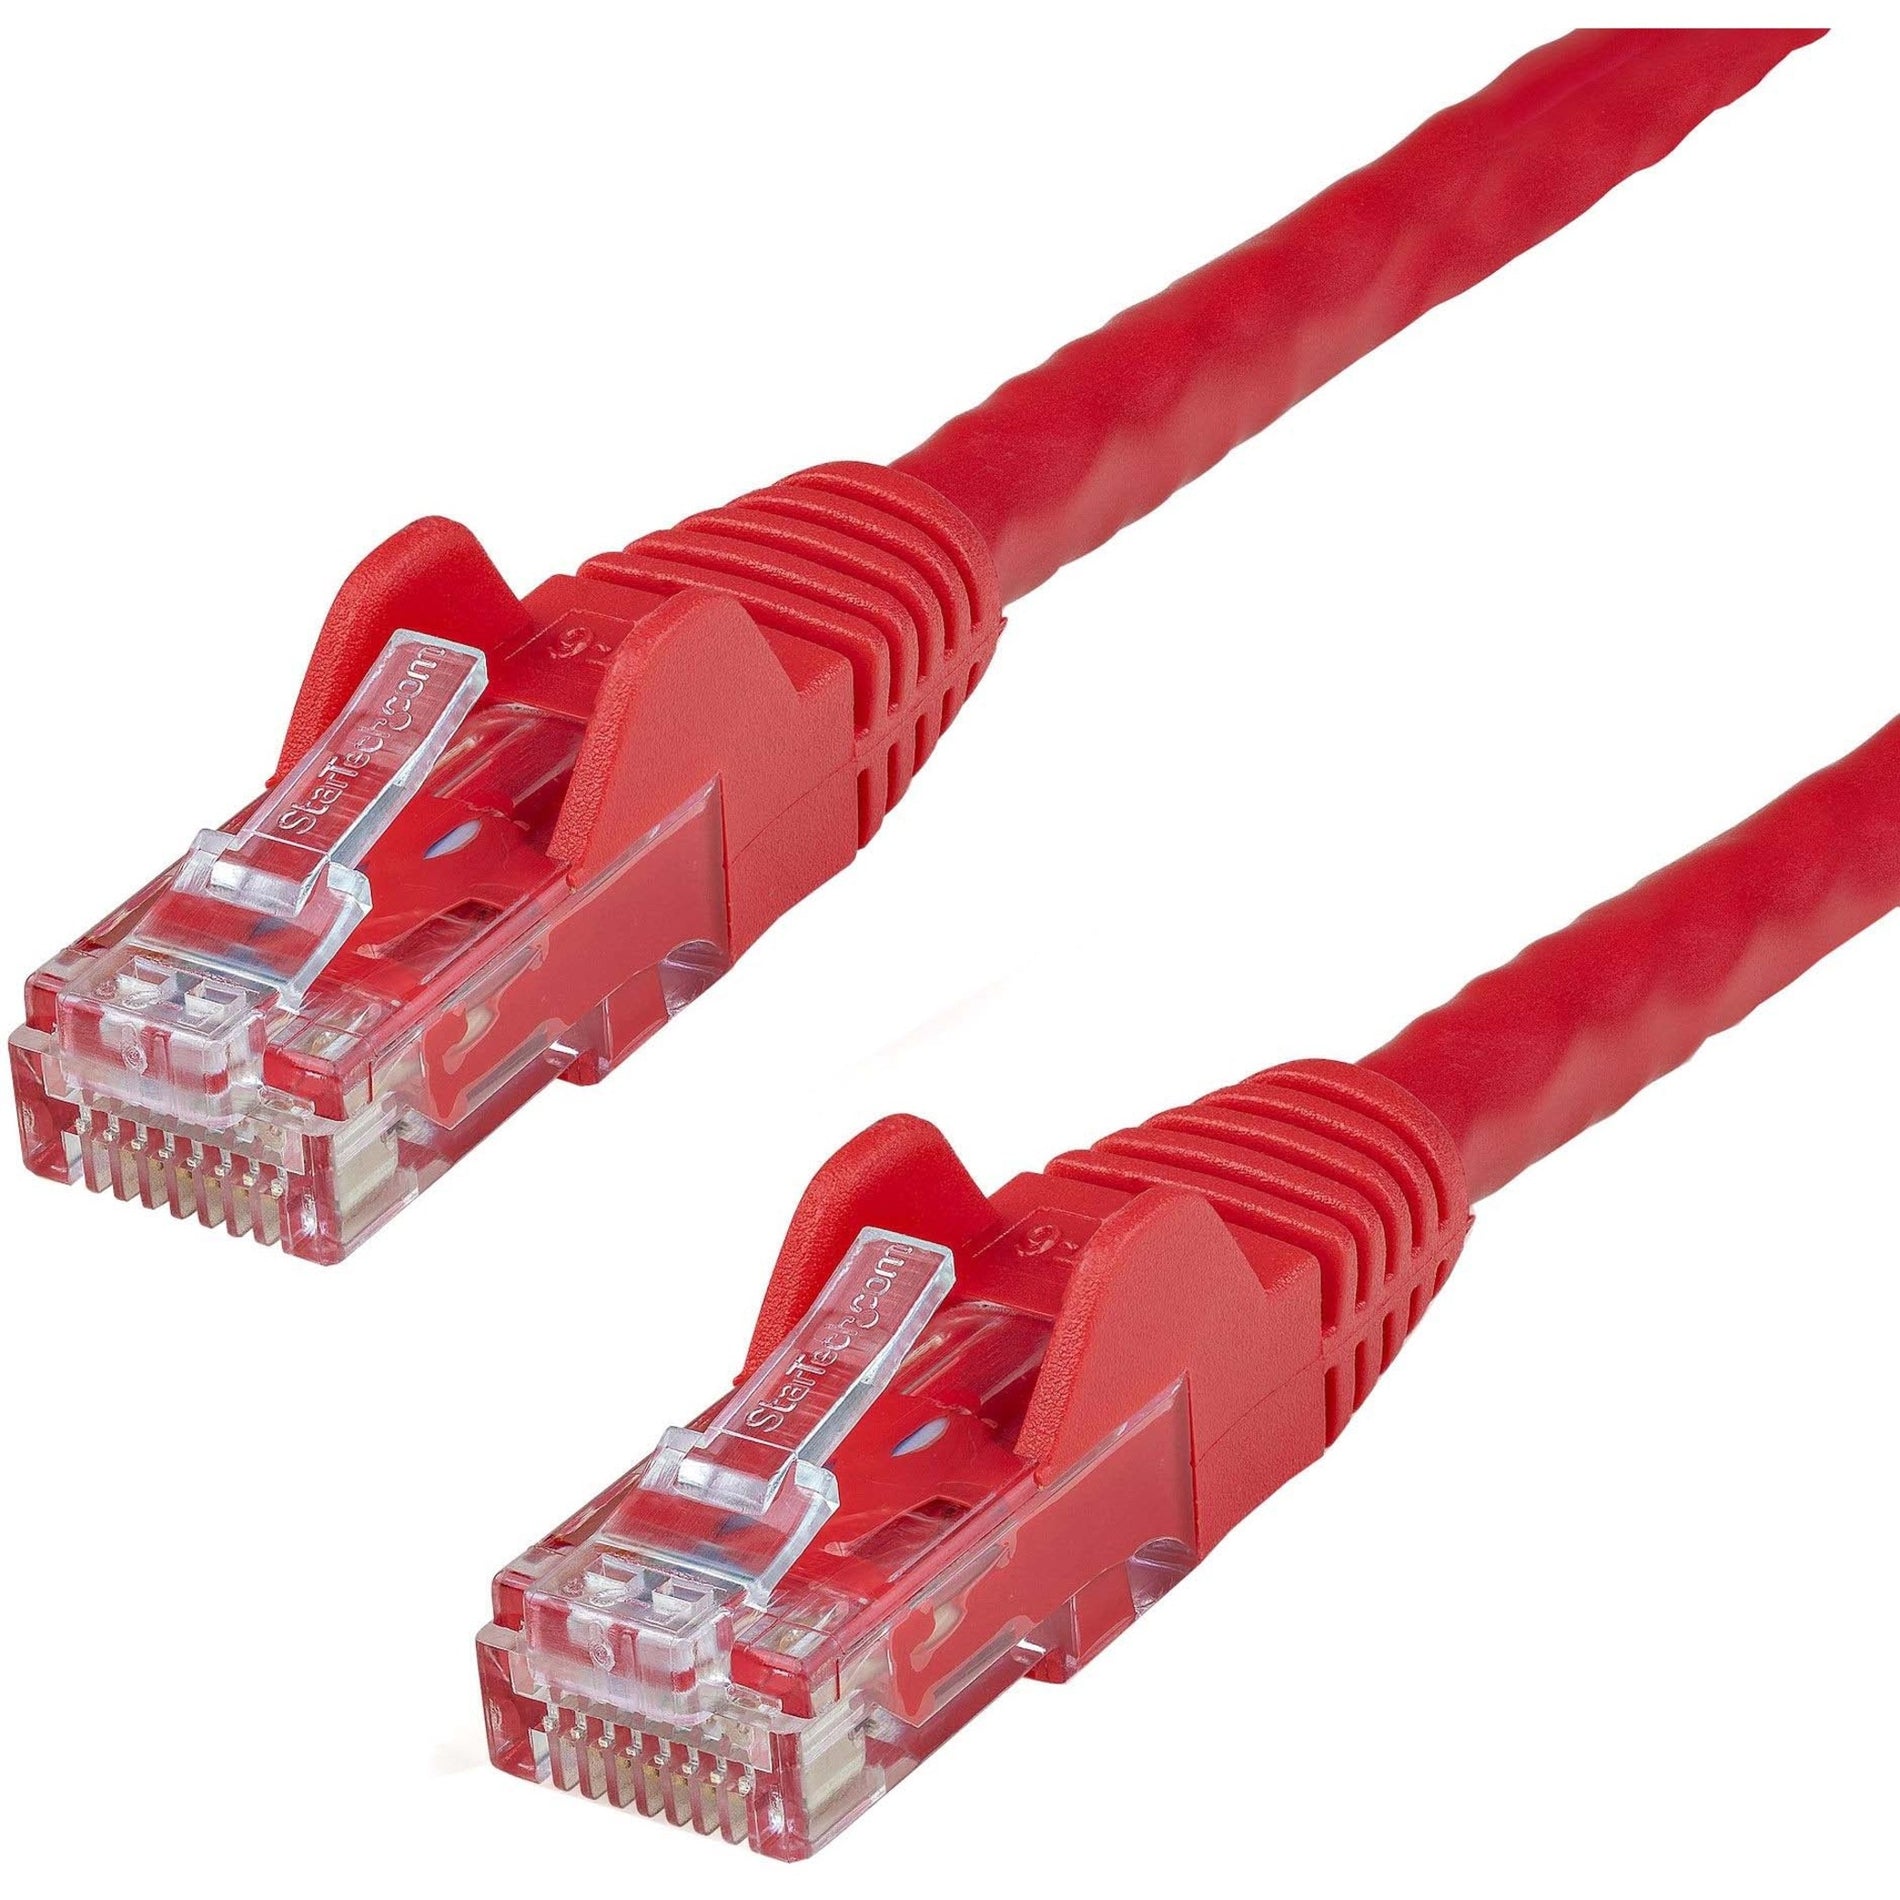 StarTech.com N6PATCH3RD 3 ft Red Snagless Cat6 UTP Patch Cable, Lifetime Warranty, 10 Gbit/s Data Transfer Rate